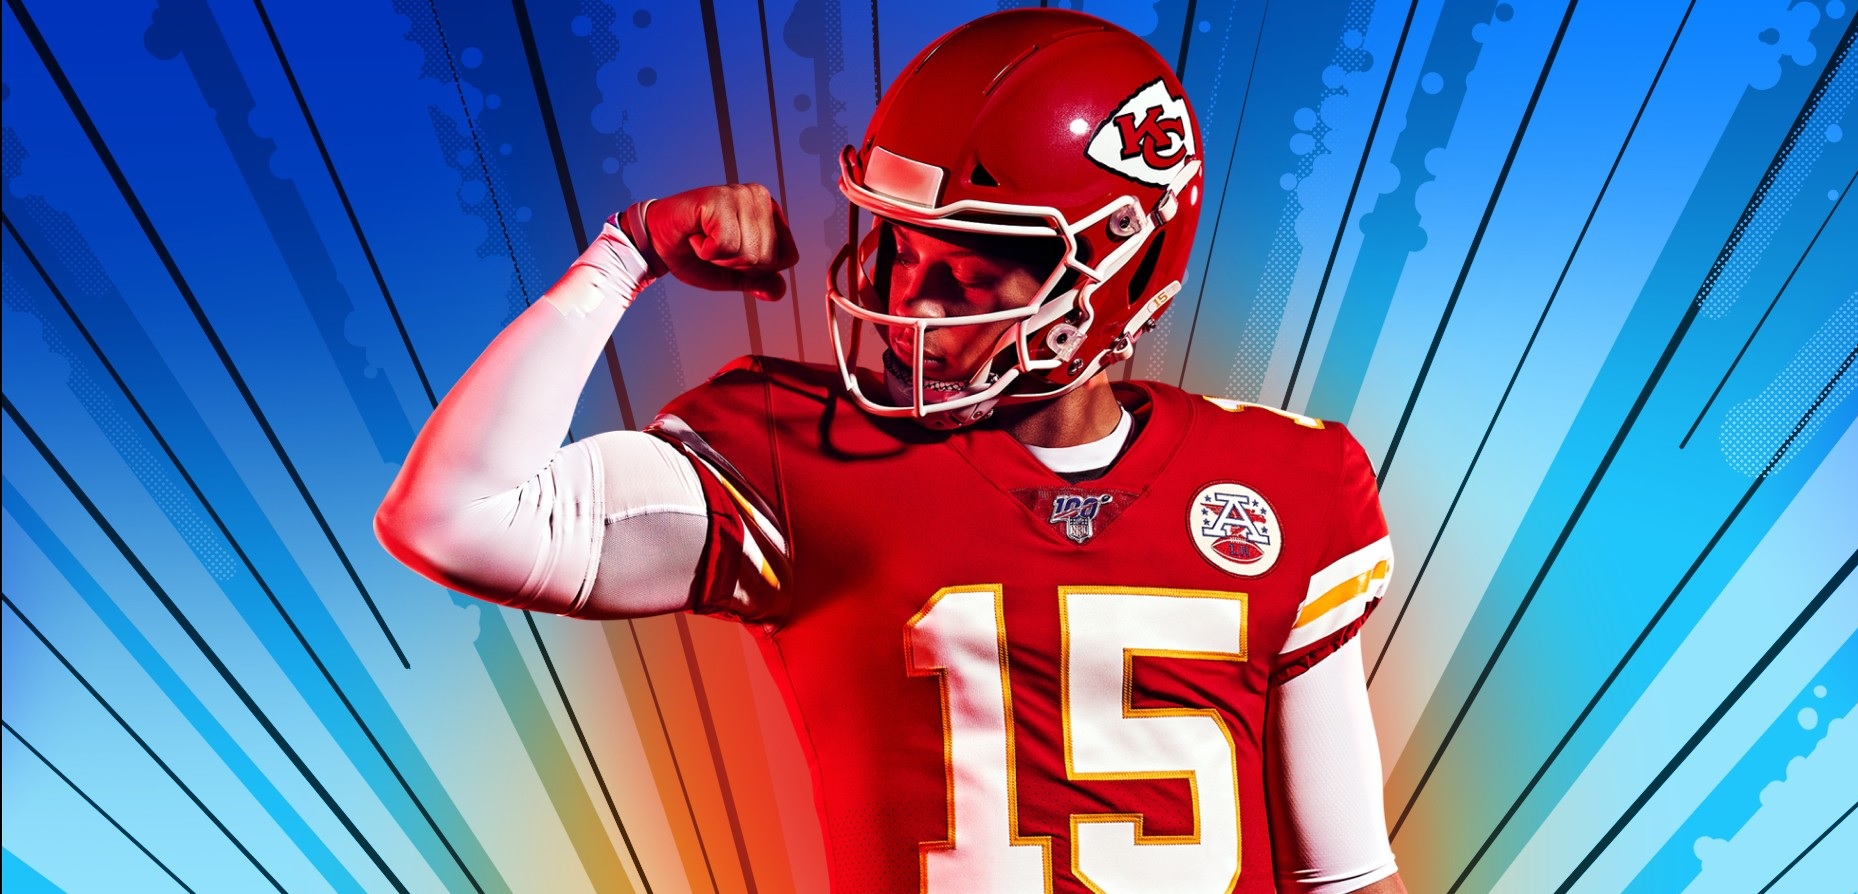 EA Gets Back Into College Football With Madden 22 Superstar KO